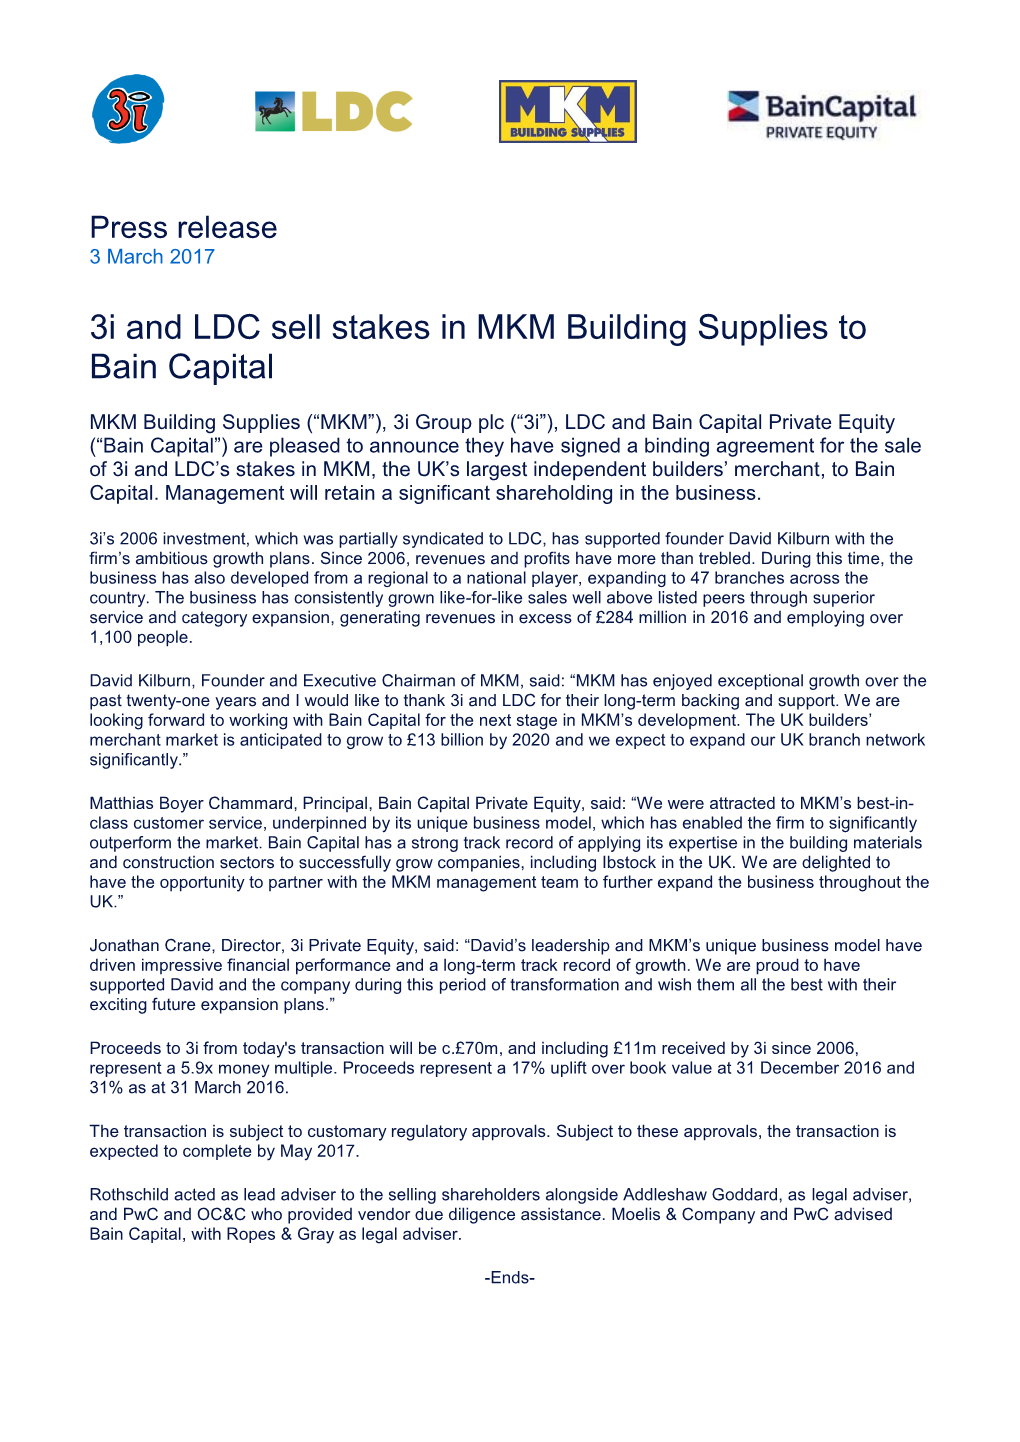 3I and LDC Sell Stakes in MKM Building Supplies to Bain Capital